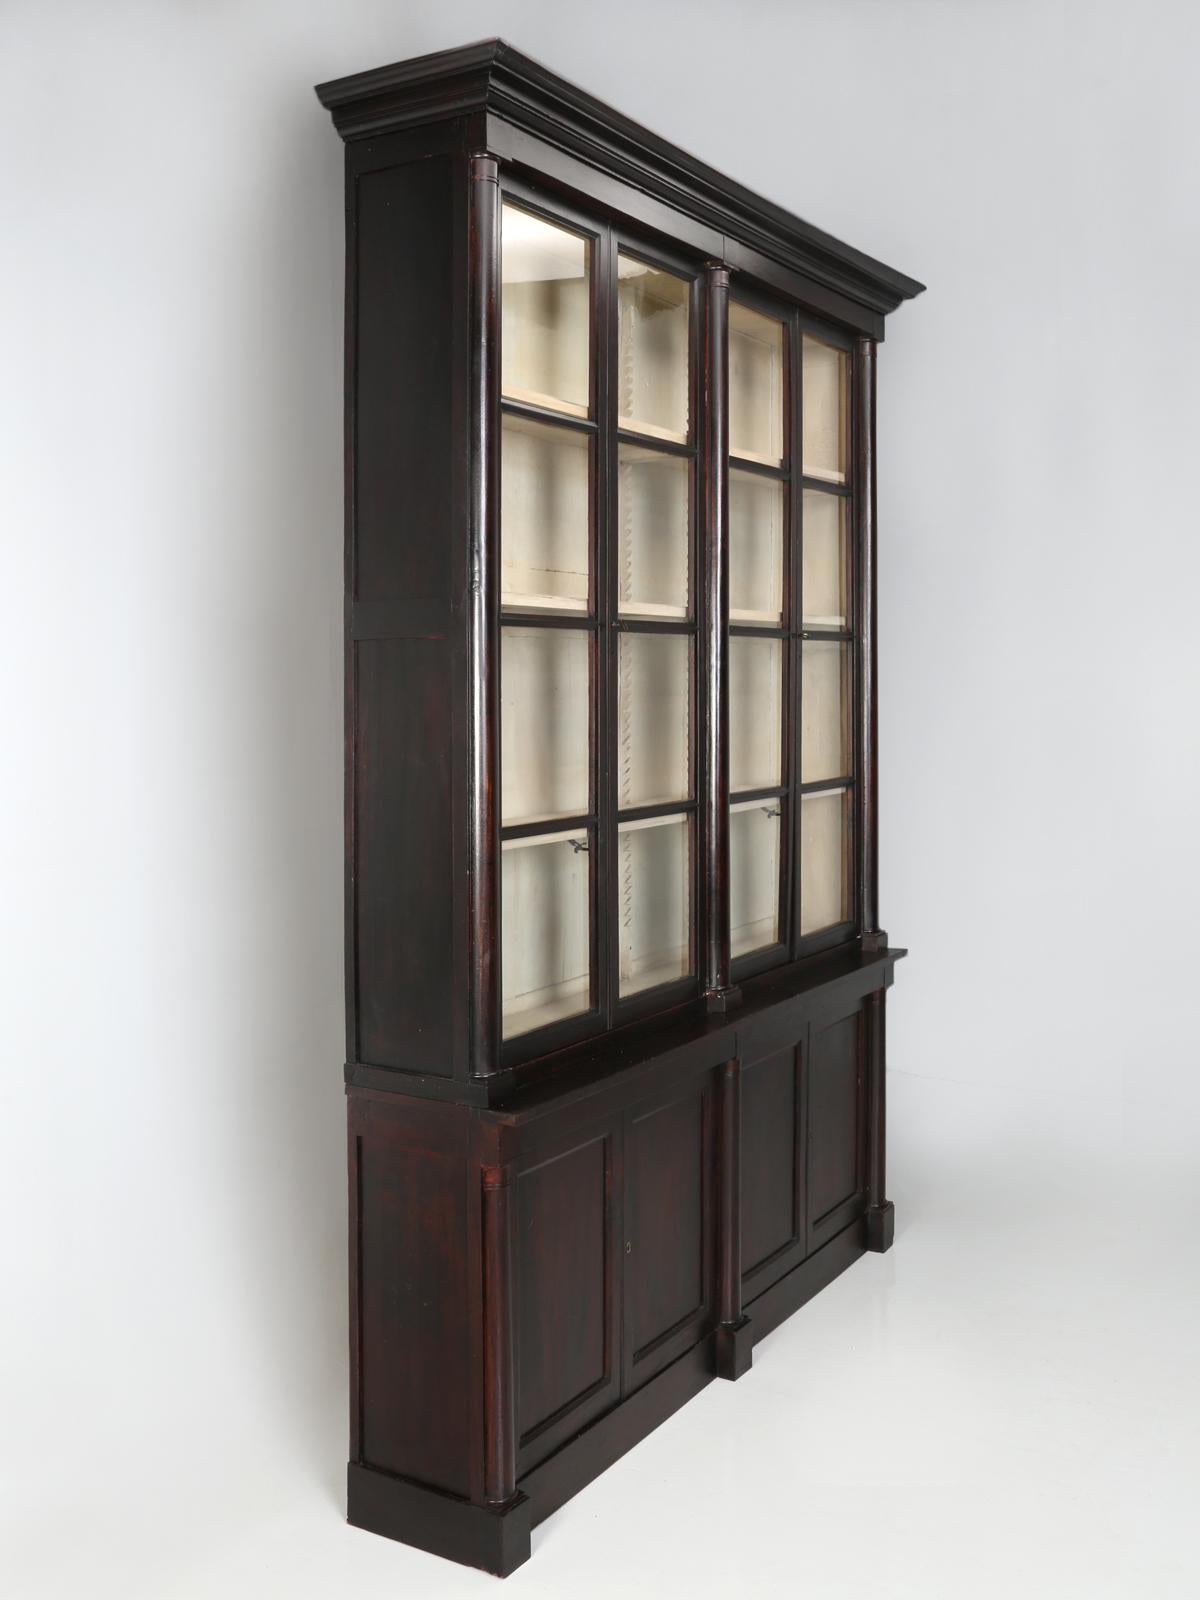 The French would refer to this antique bookcase as époque, meaning from the time of the Empire period and not just in the style of. Empire French furniture was an early 19th century (circa 1800 to the late 1820s) and represented the 2nd phase of